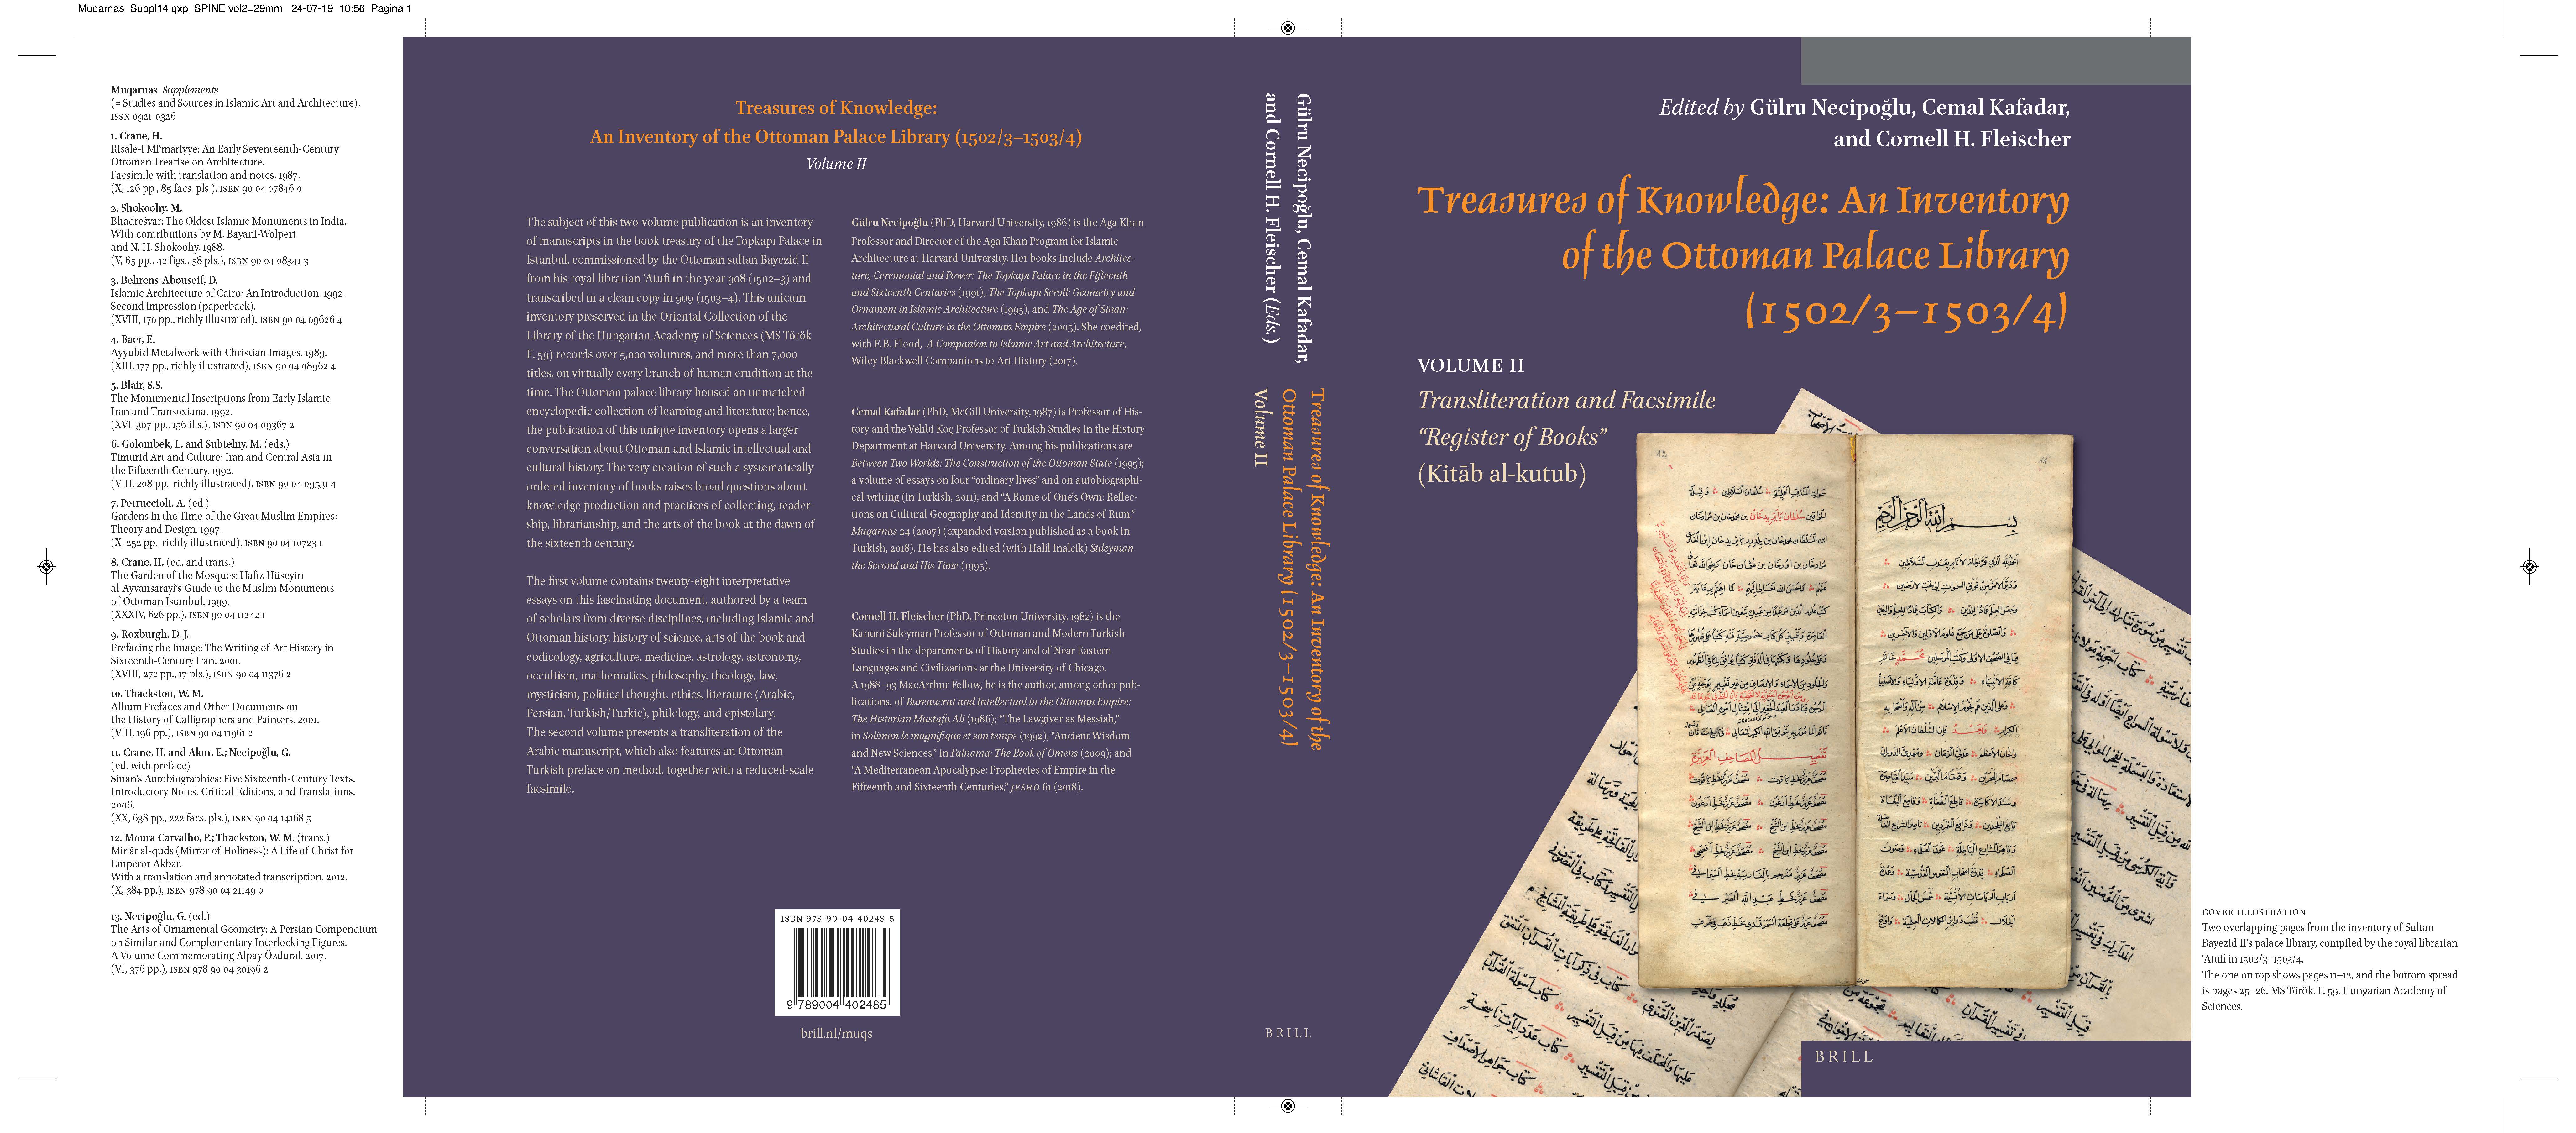 Treasures of Knowledge: An Inventory of the Ottoman Palace Library (1502/3-1503/4): VOLUME II